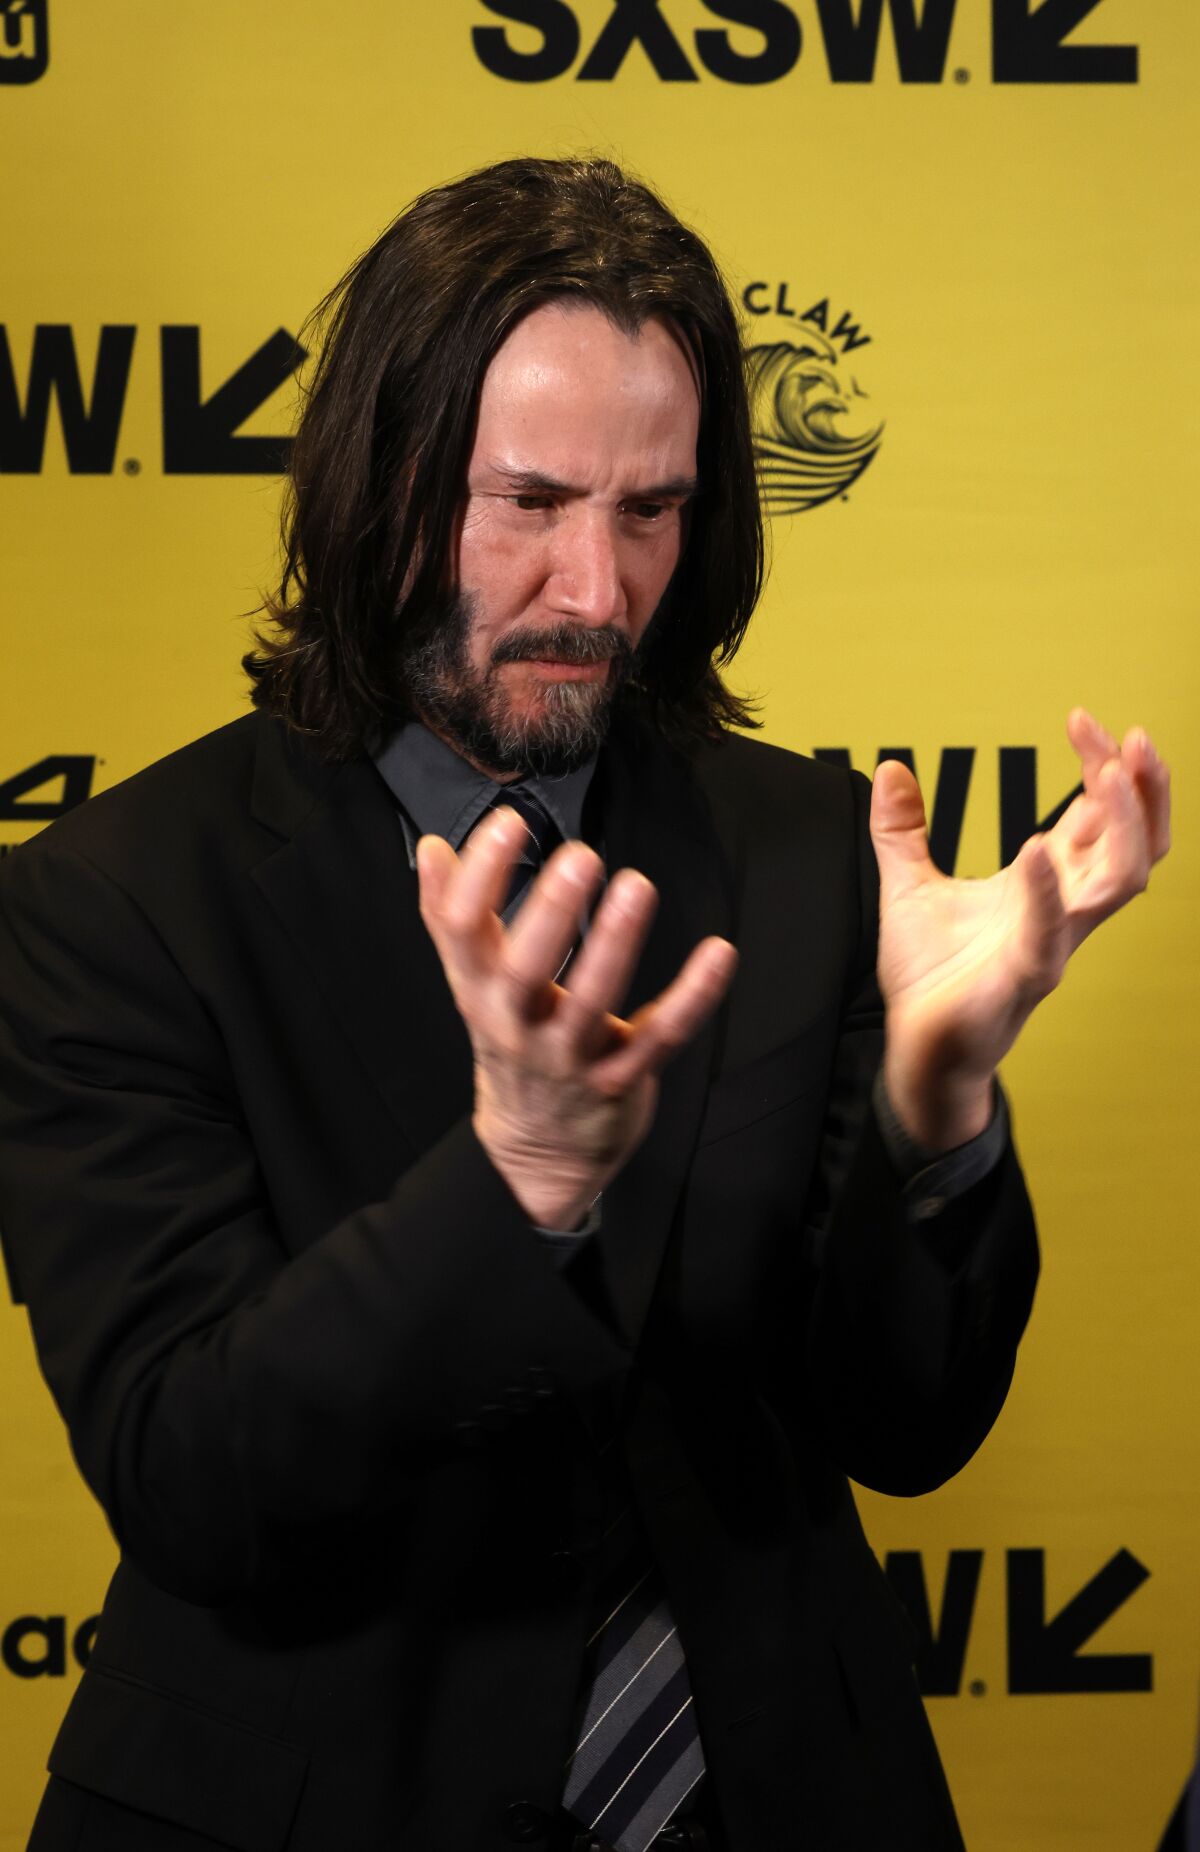 Keanu Reeves in a dark suit and tie against a yellow background with various brand logos